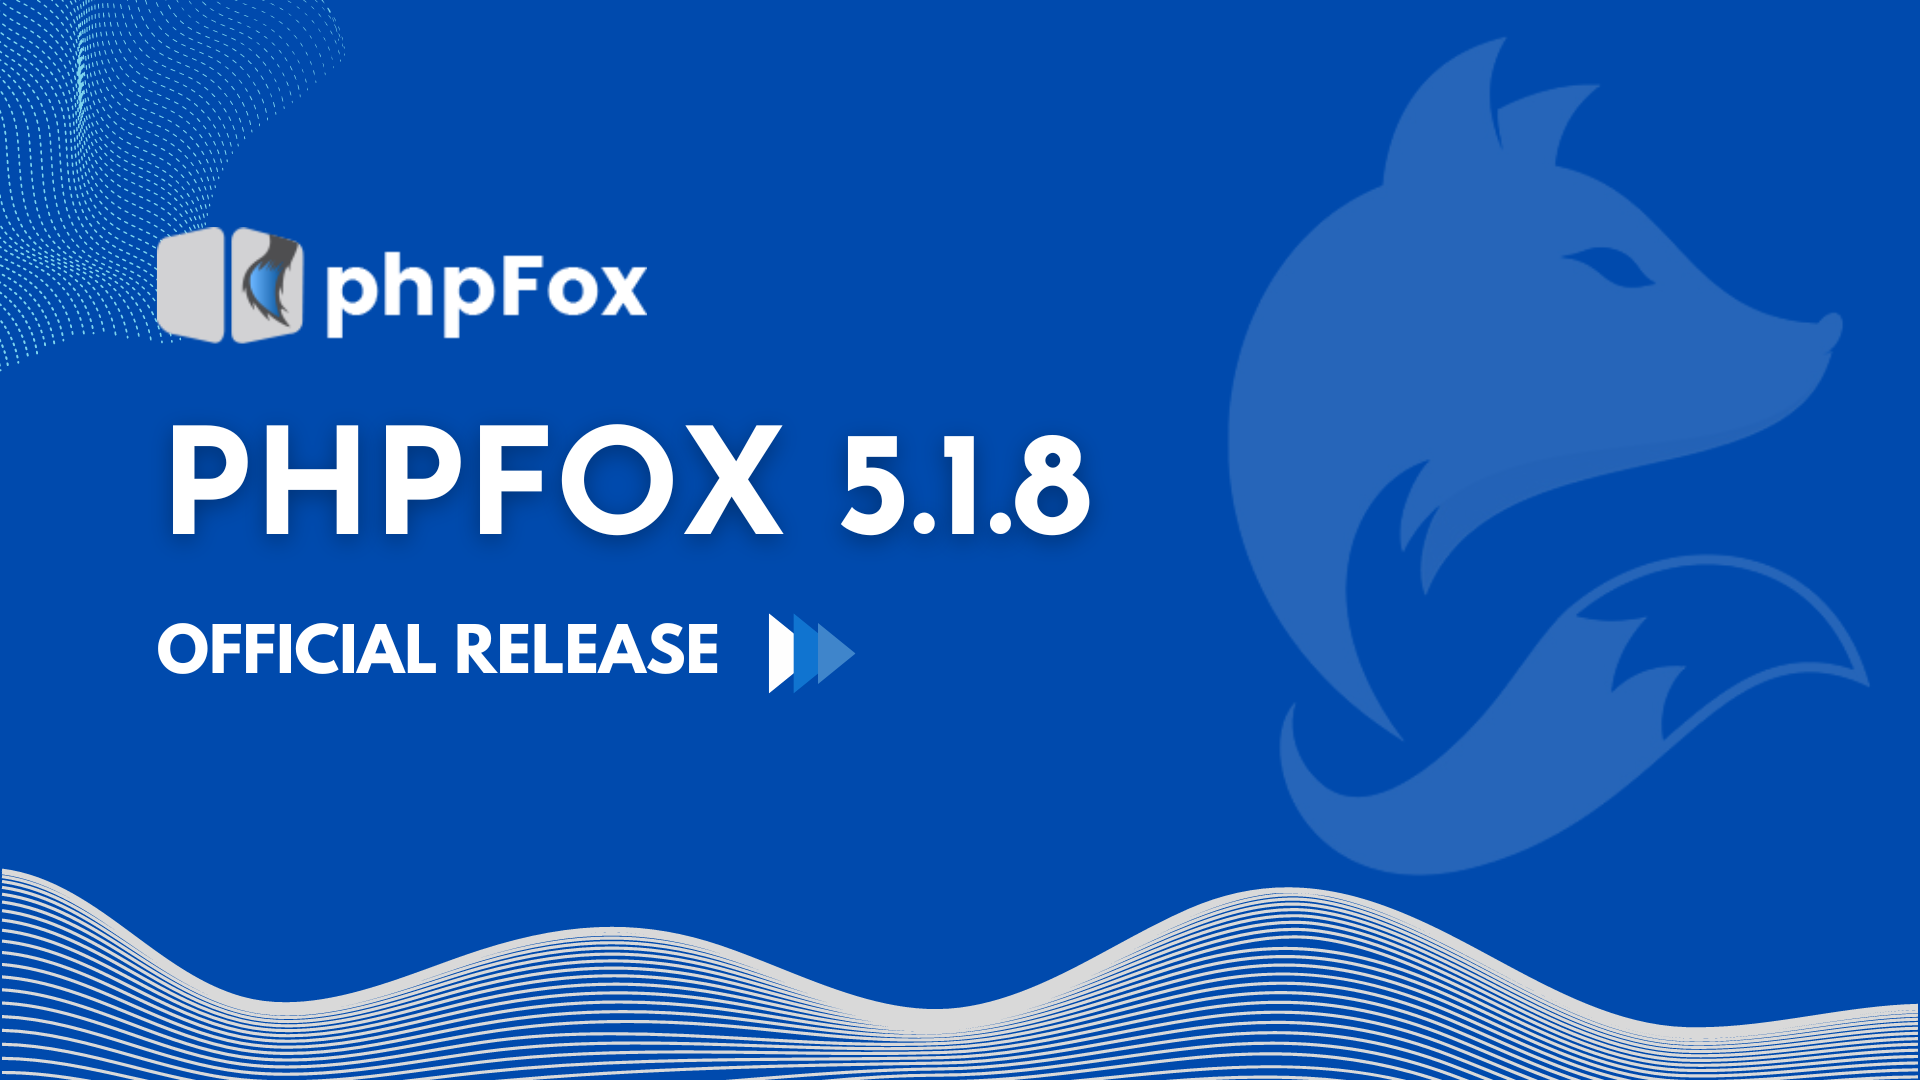 phpFox 5.1.8 Official Release